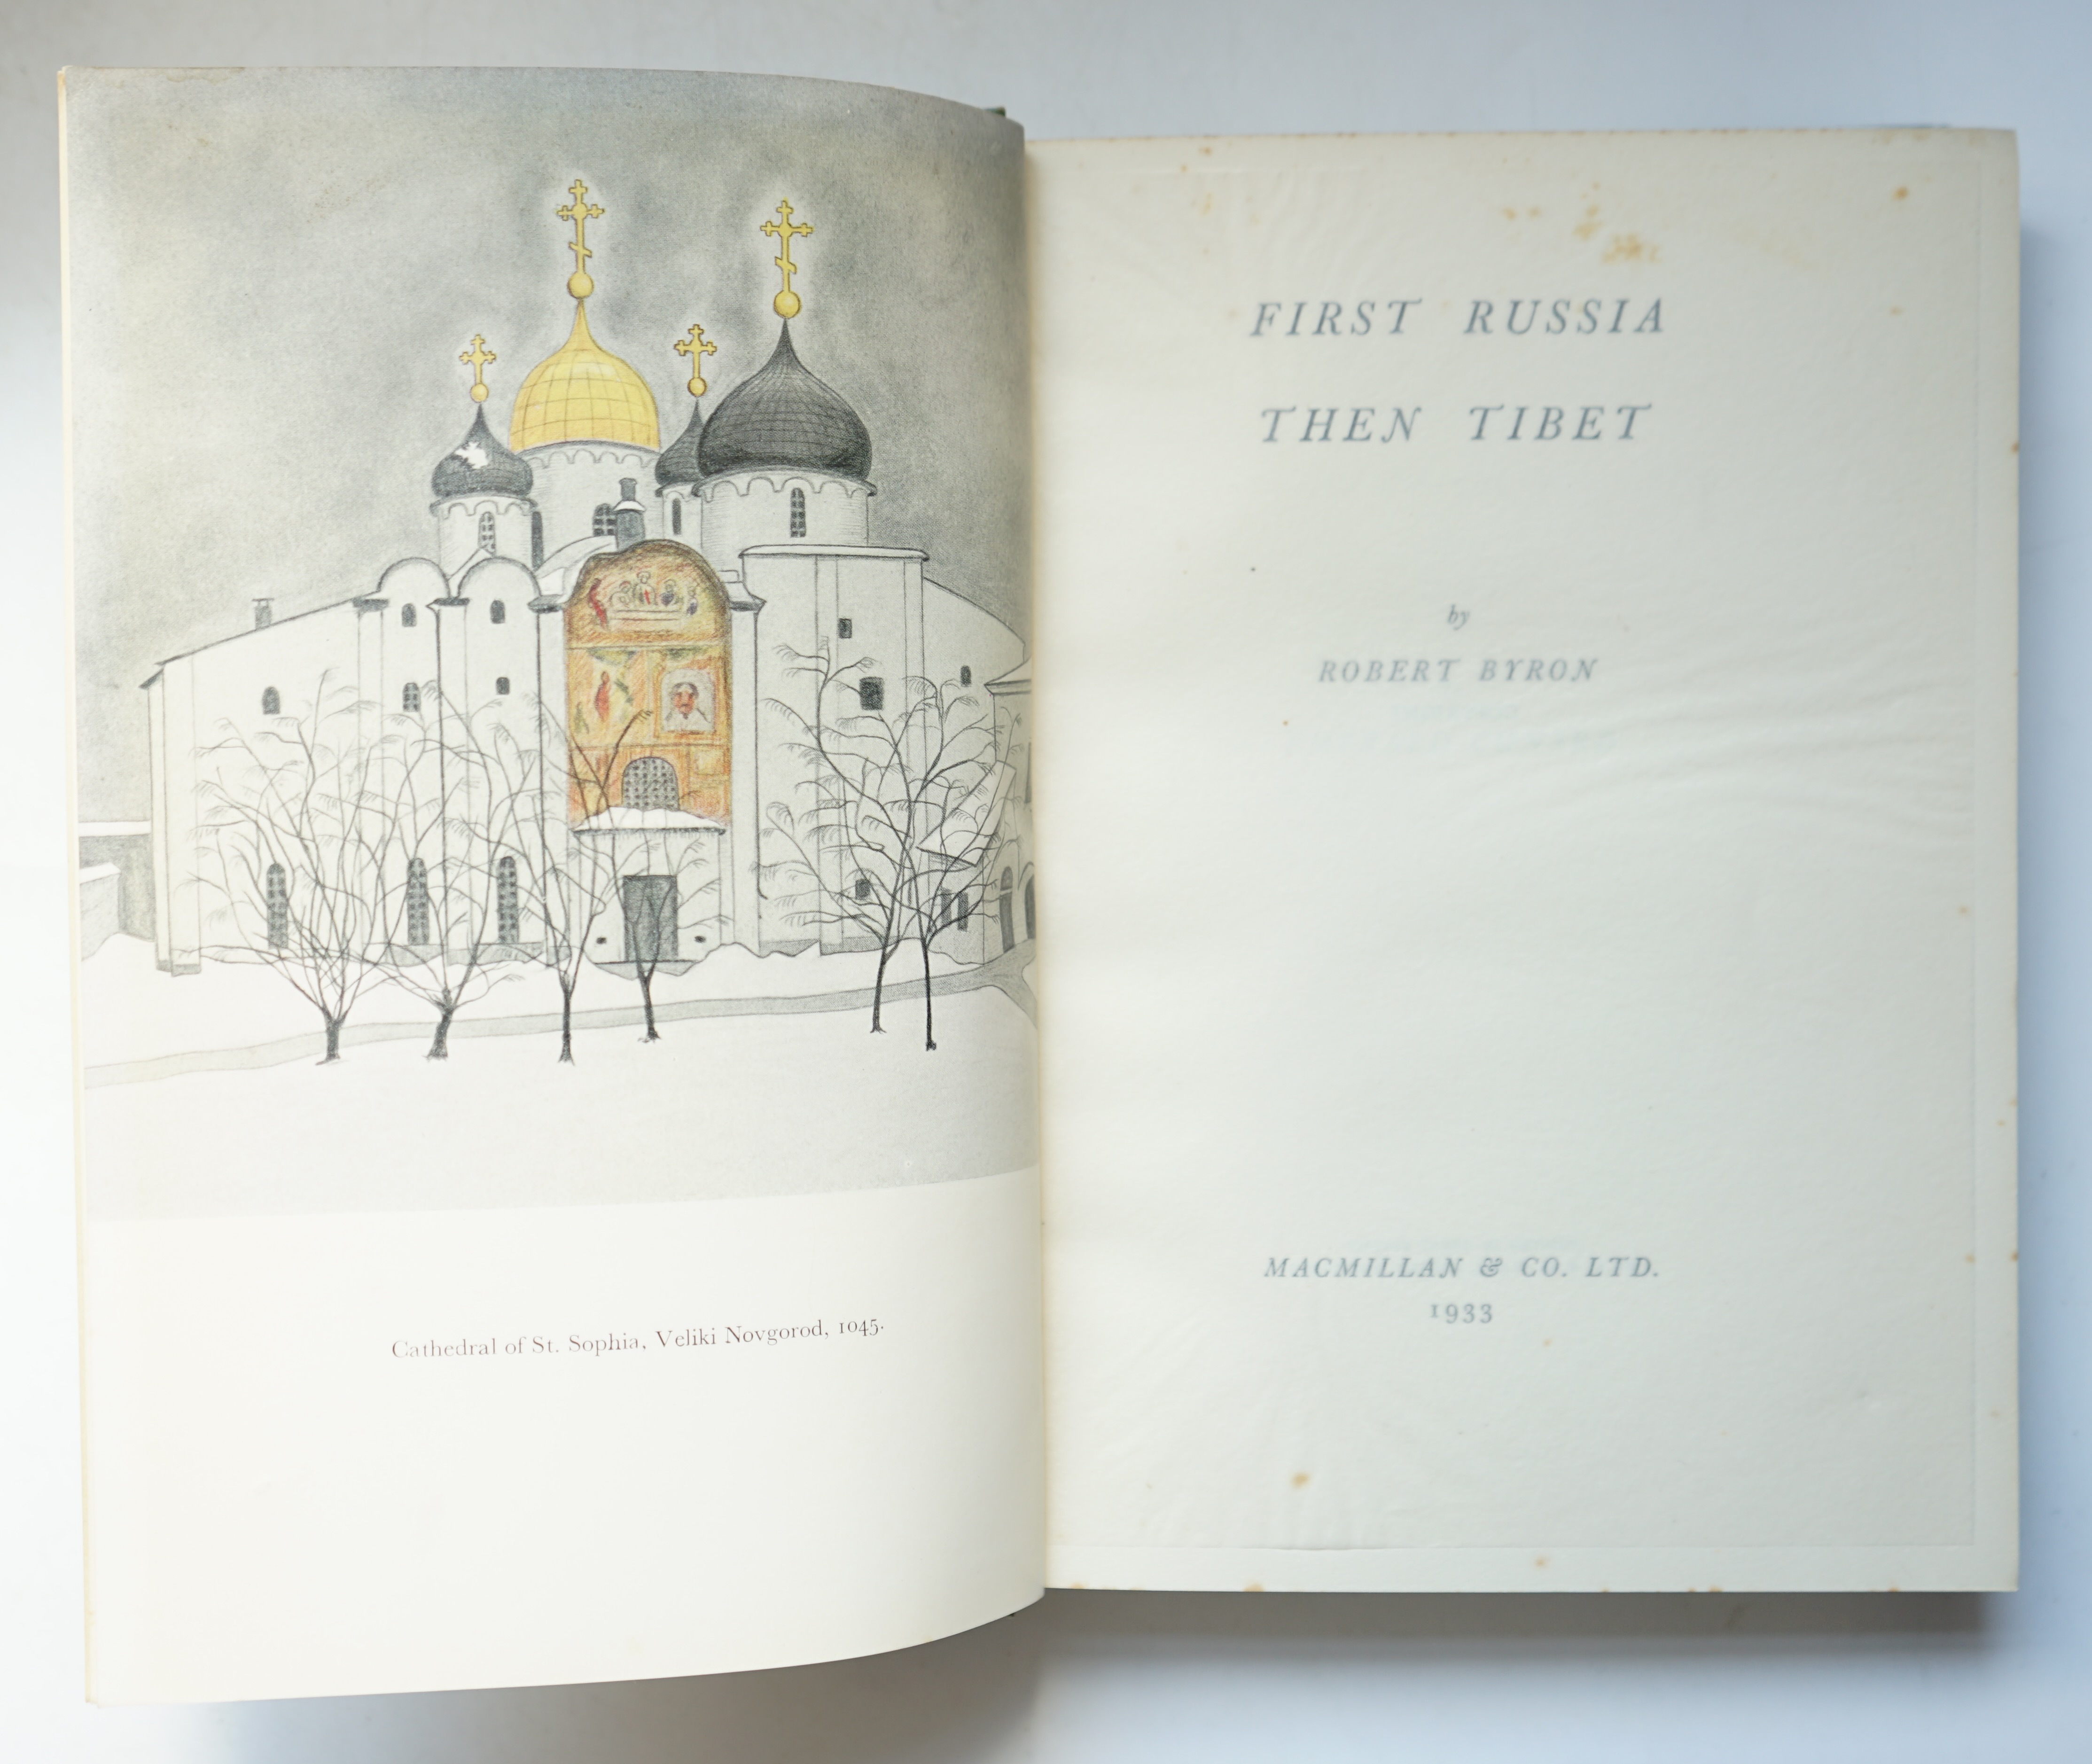 Byron, Robert - First Russia Then Tibet, 8vo, original green cloth, colour frontispiece and black and white plates, Macmillan & Co. Ltd, London, 1933